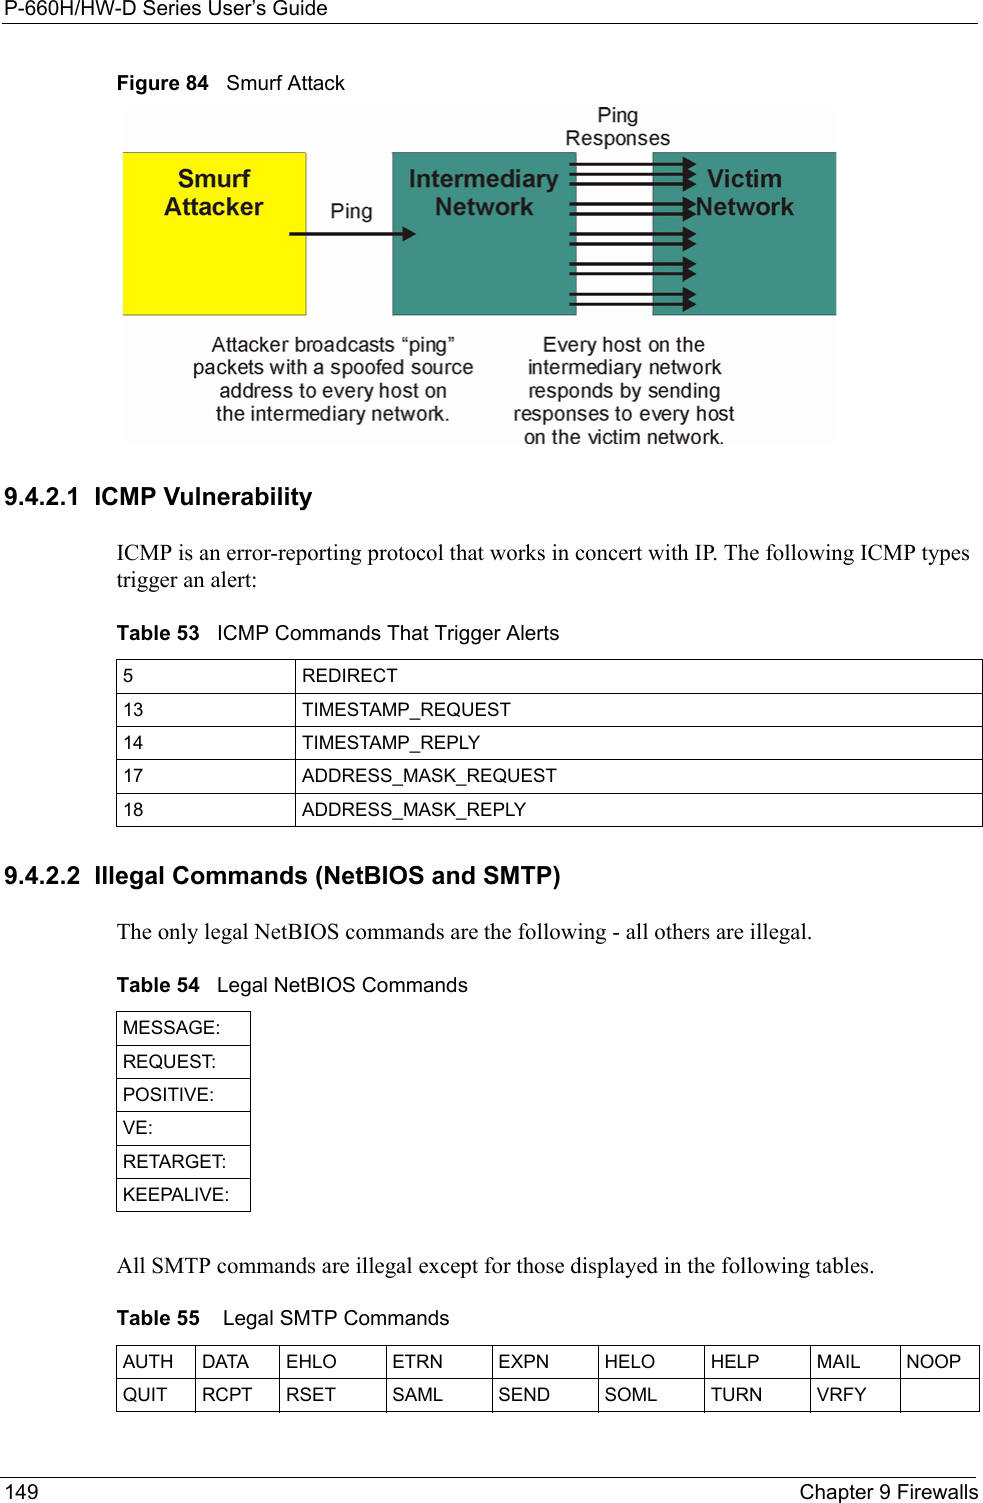 P-660H/HW-D Series User’s Guide149 Chapter 9 FirewallsFigure 84   Smurf Attack9.4.2.1  ICMP Vulnerability ICMP is an error-reporting protocol that works in concert with IP. The following ICMP types trigger an alert:9.4.2.2  Illegal Commands (NetBIOS and SMTP)The only legal NetBIOS commands are the following - all others are illegal.All SMTP commands are illegal except for those displayed in the following tables. Table 53   ICMP Commands That Trigger Alerts5REDIRECT13 TIMESTAMP_REQUEST14 TIMESTAMP_REPLY17 ADDRESS_MASK_REQUEST18 ADDRESS_MASK_REPLYTable 54   Legal NetBIOS CommandsMESSAGE:REQUEST:POSITIVE:VE:RETARGET:KEEPALIVE:Table 55    Legal SMTP CommandsAUTH DATA EHLO ETRN EXPN HELO HELP MAIL NOOPQUIT RCPT RSET SAML SEND SOML  TURN VRFY